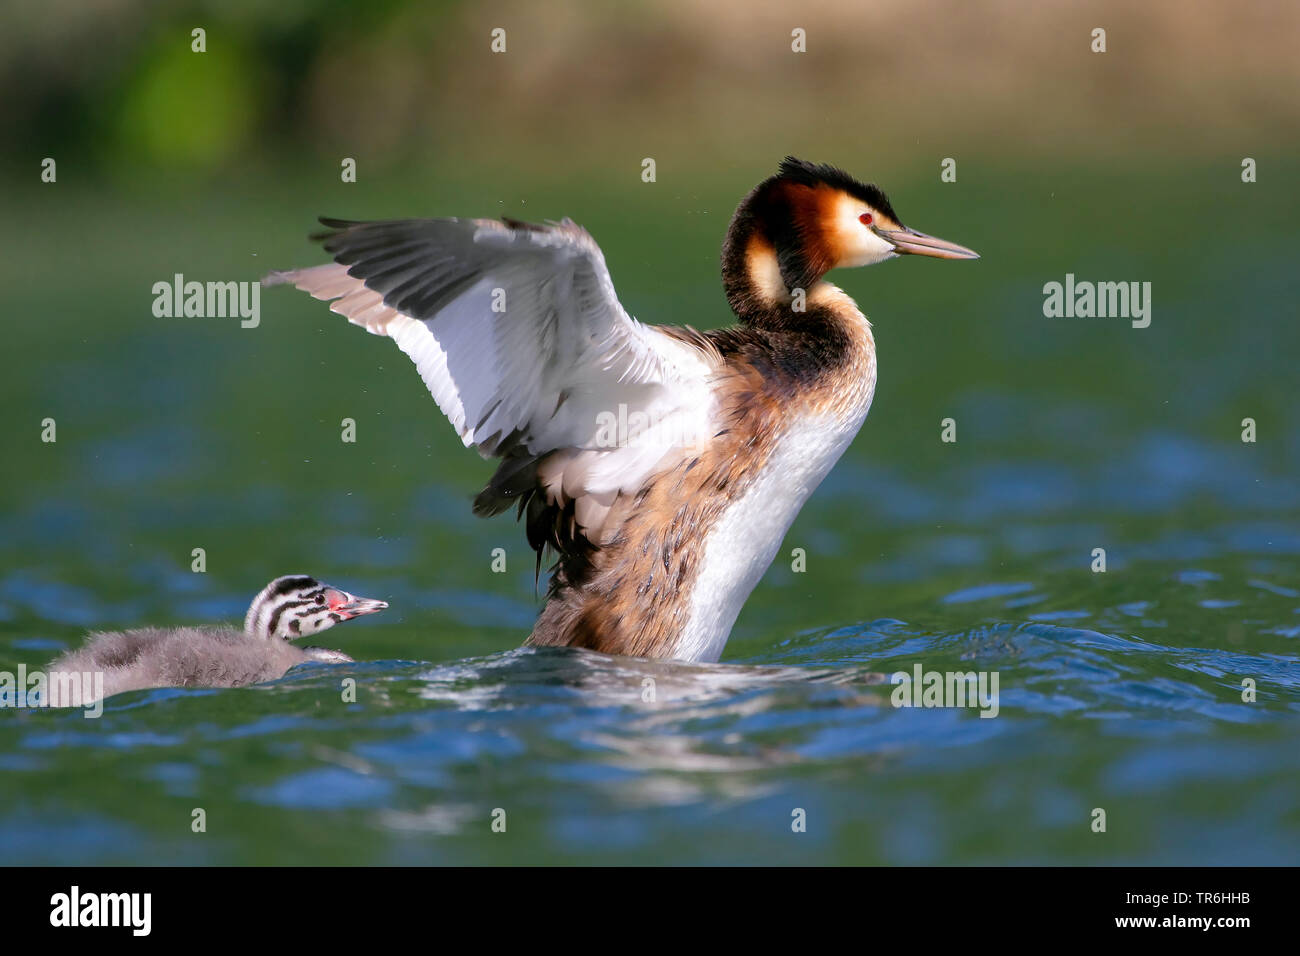 great crested grebe (Podiceps cristatus), chick slipping from the bacl of the adult into the water, Germany, North Rhine-Westphalia, Bergisches Land Stock Photo